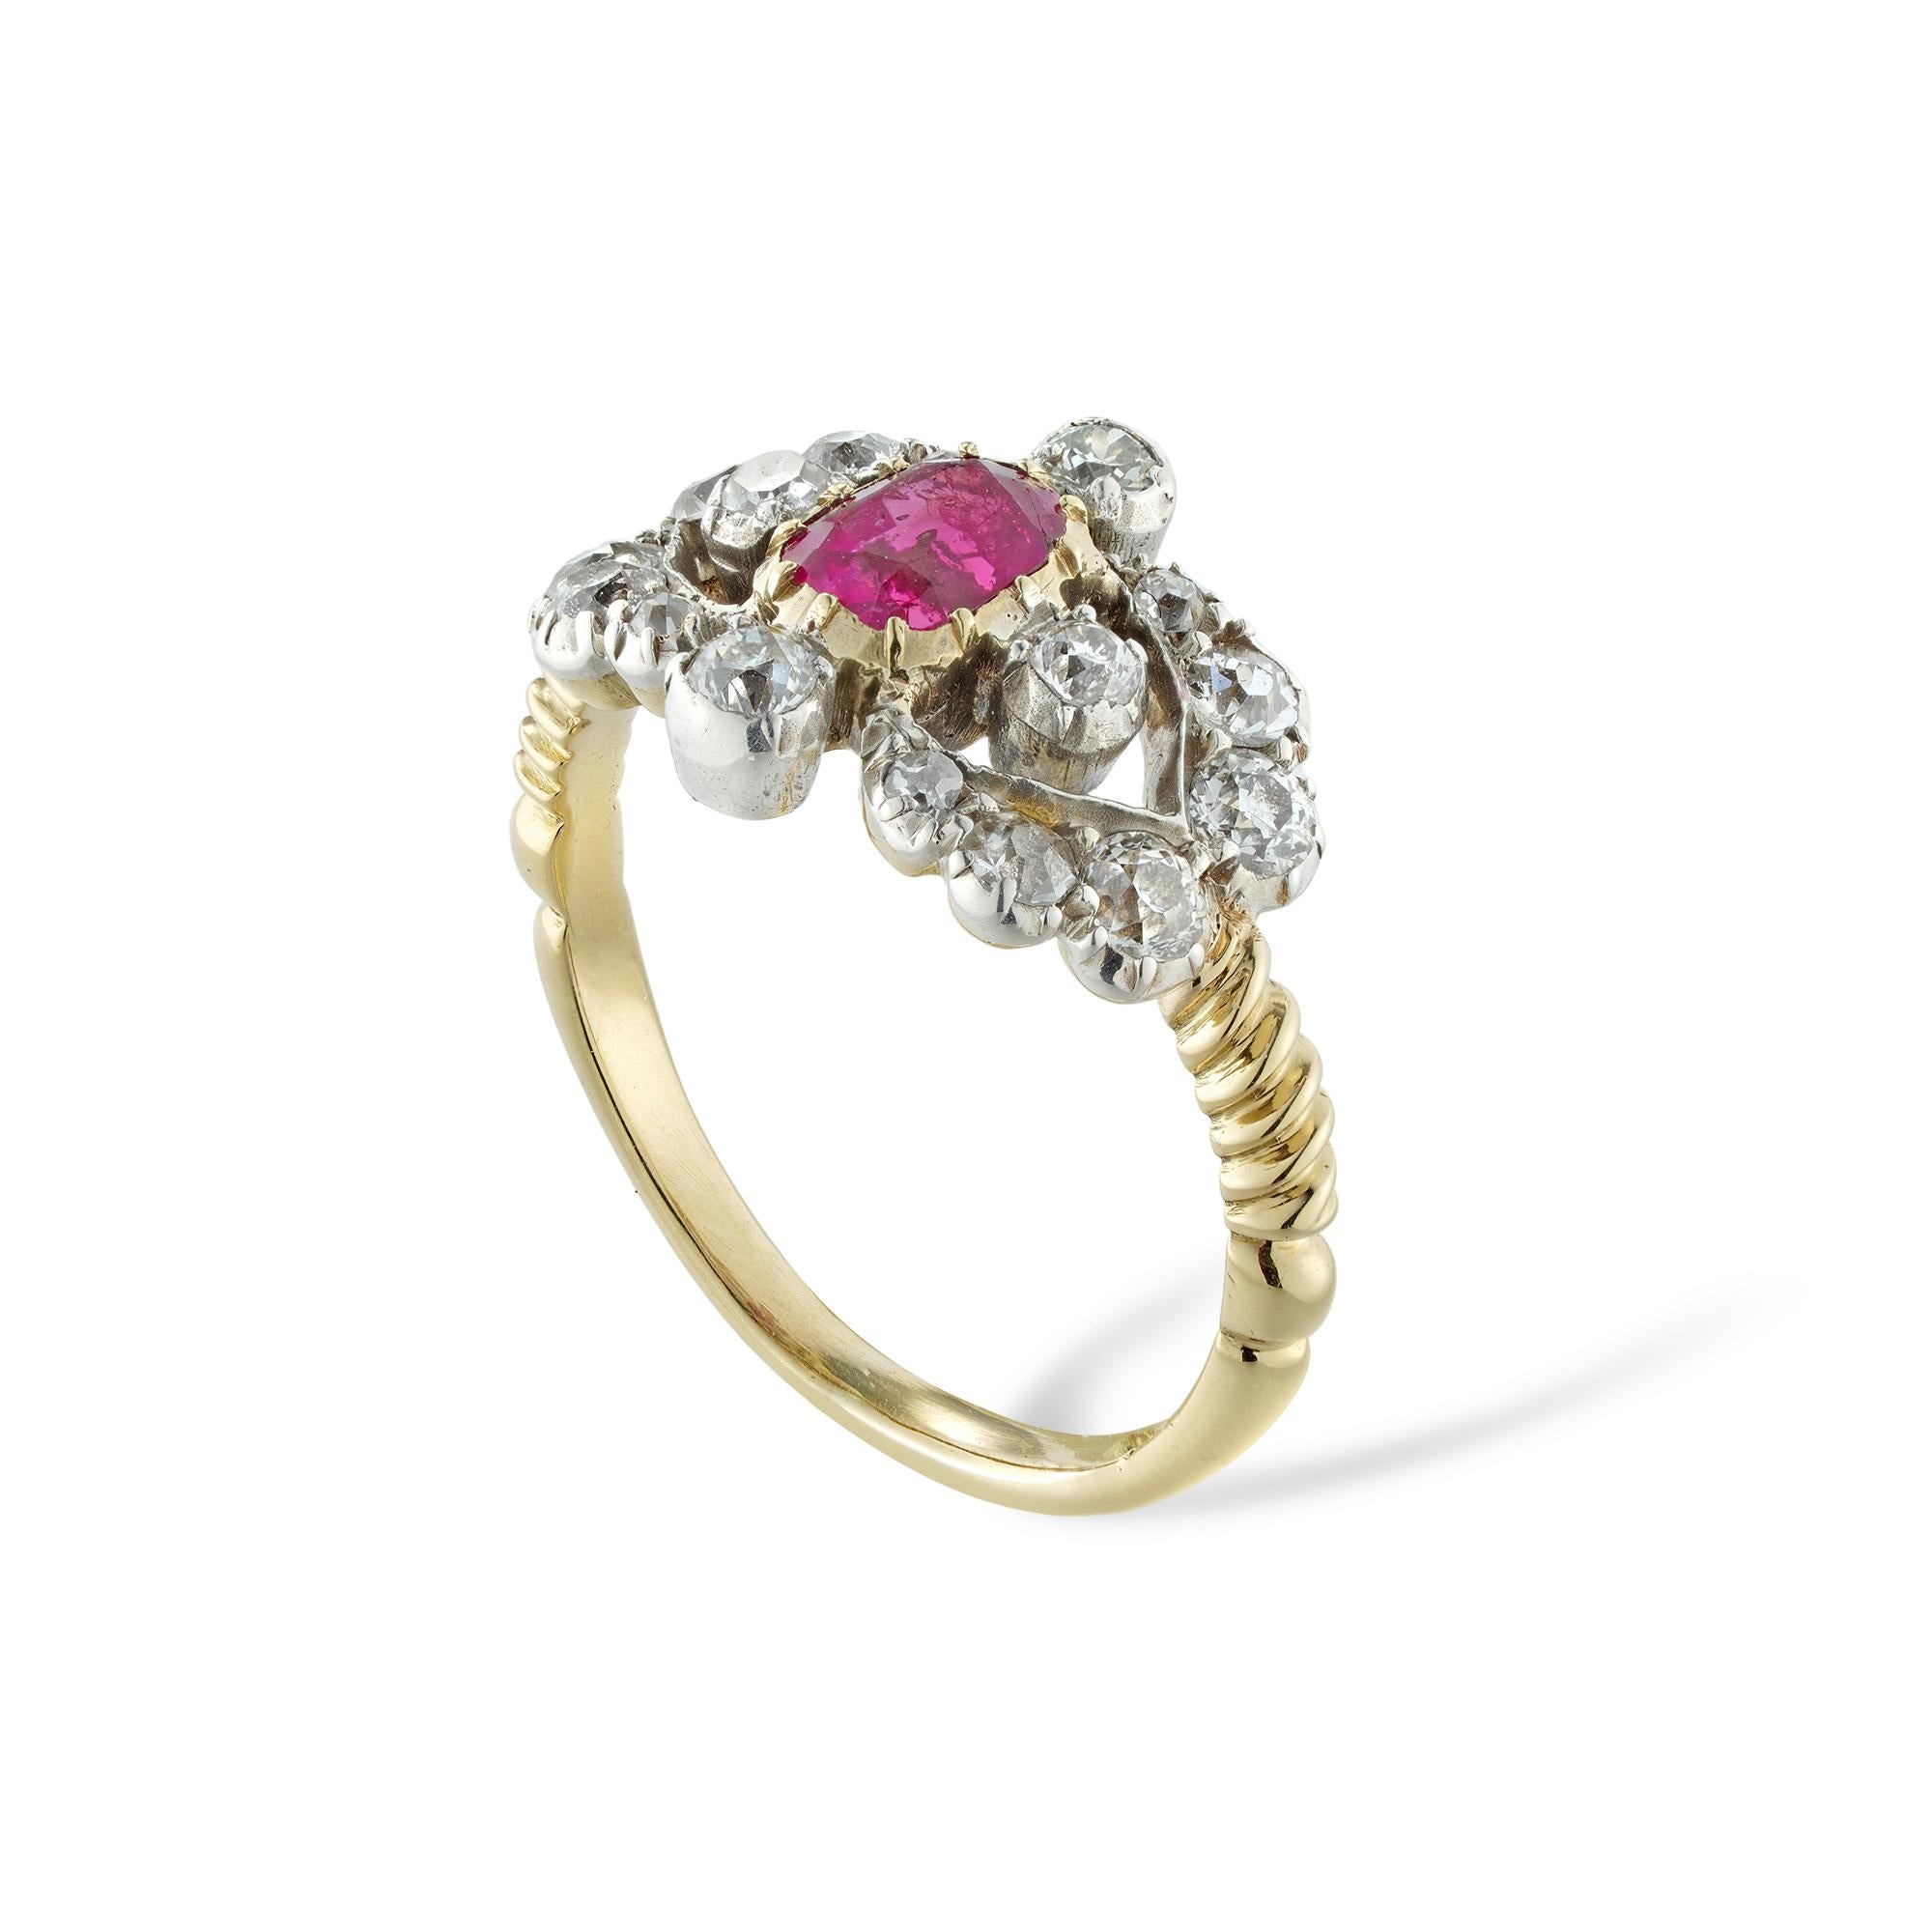 A Victorian ruby and diamond ring, to the centre a cushion-cut ruby estimated to weigh 0.65 carats, surrounded by four old European-cut diamonds, with V-shaped diamond-set sides encrusted with further twelve old-cut diamonds o graduating size, the